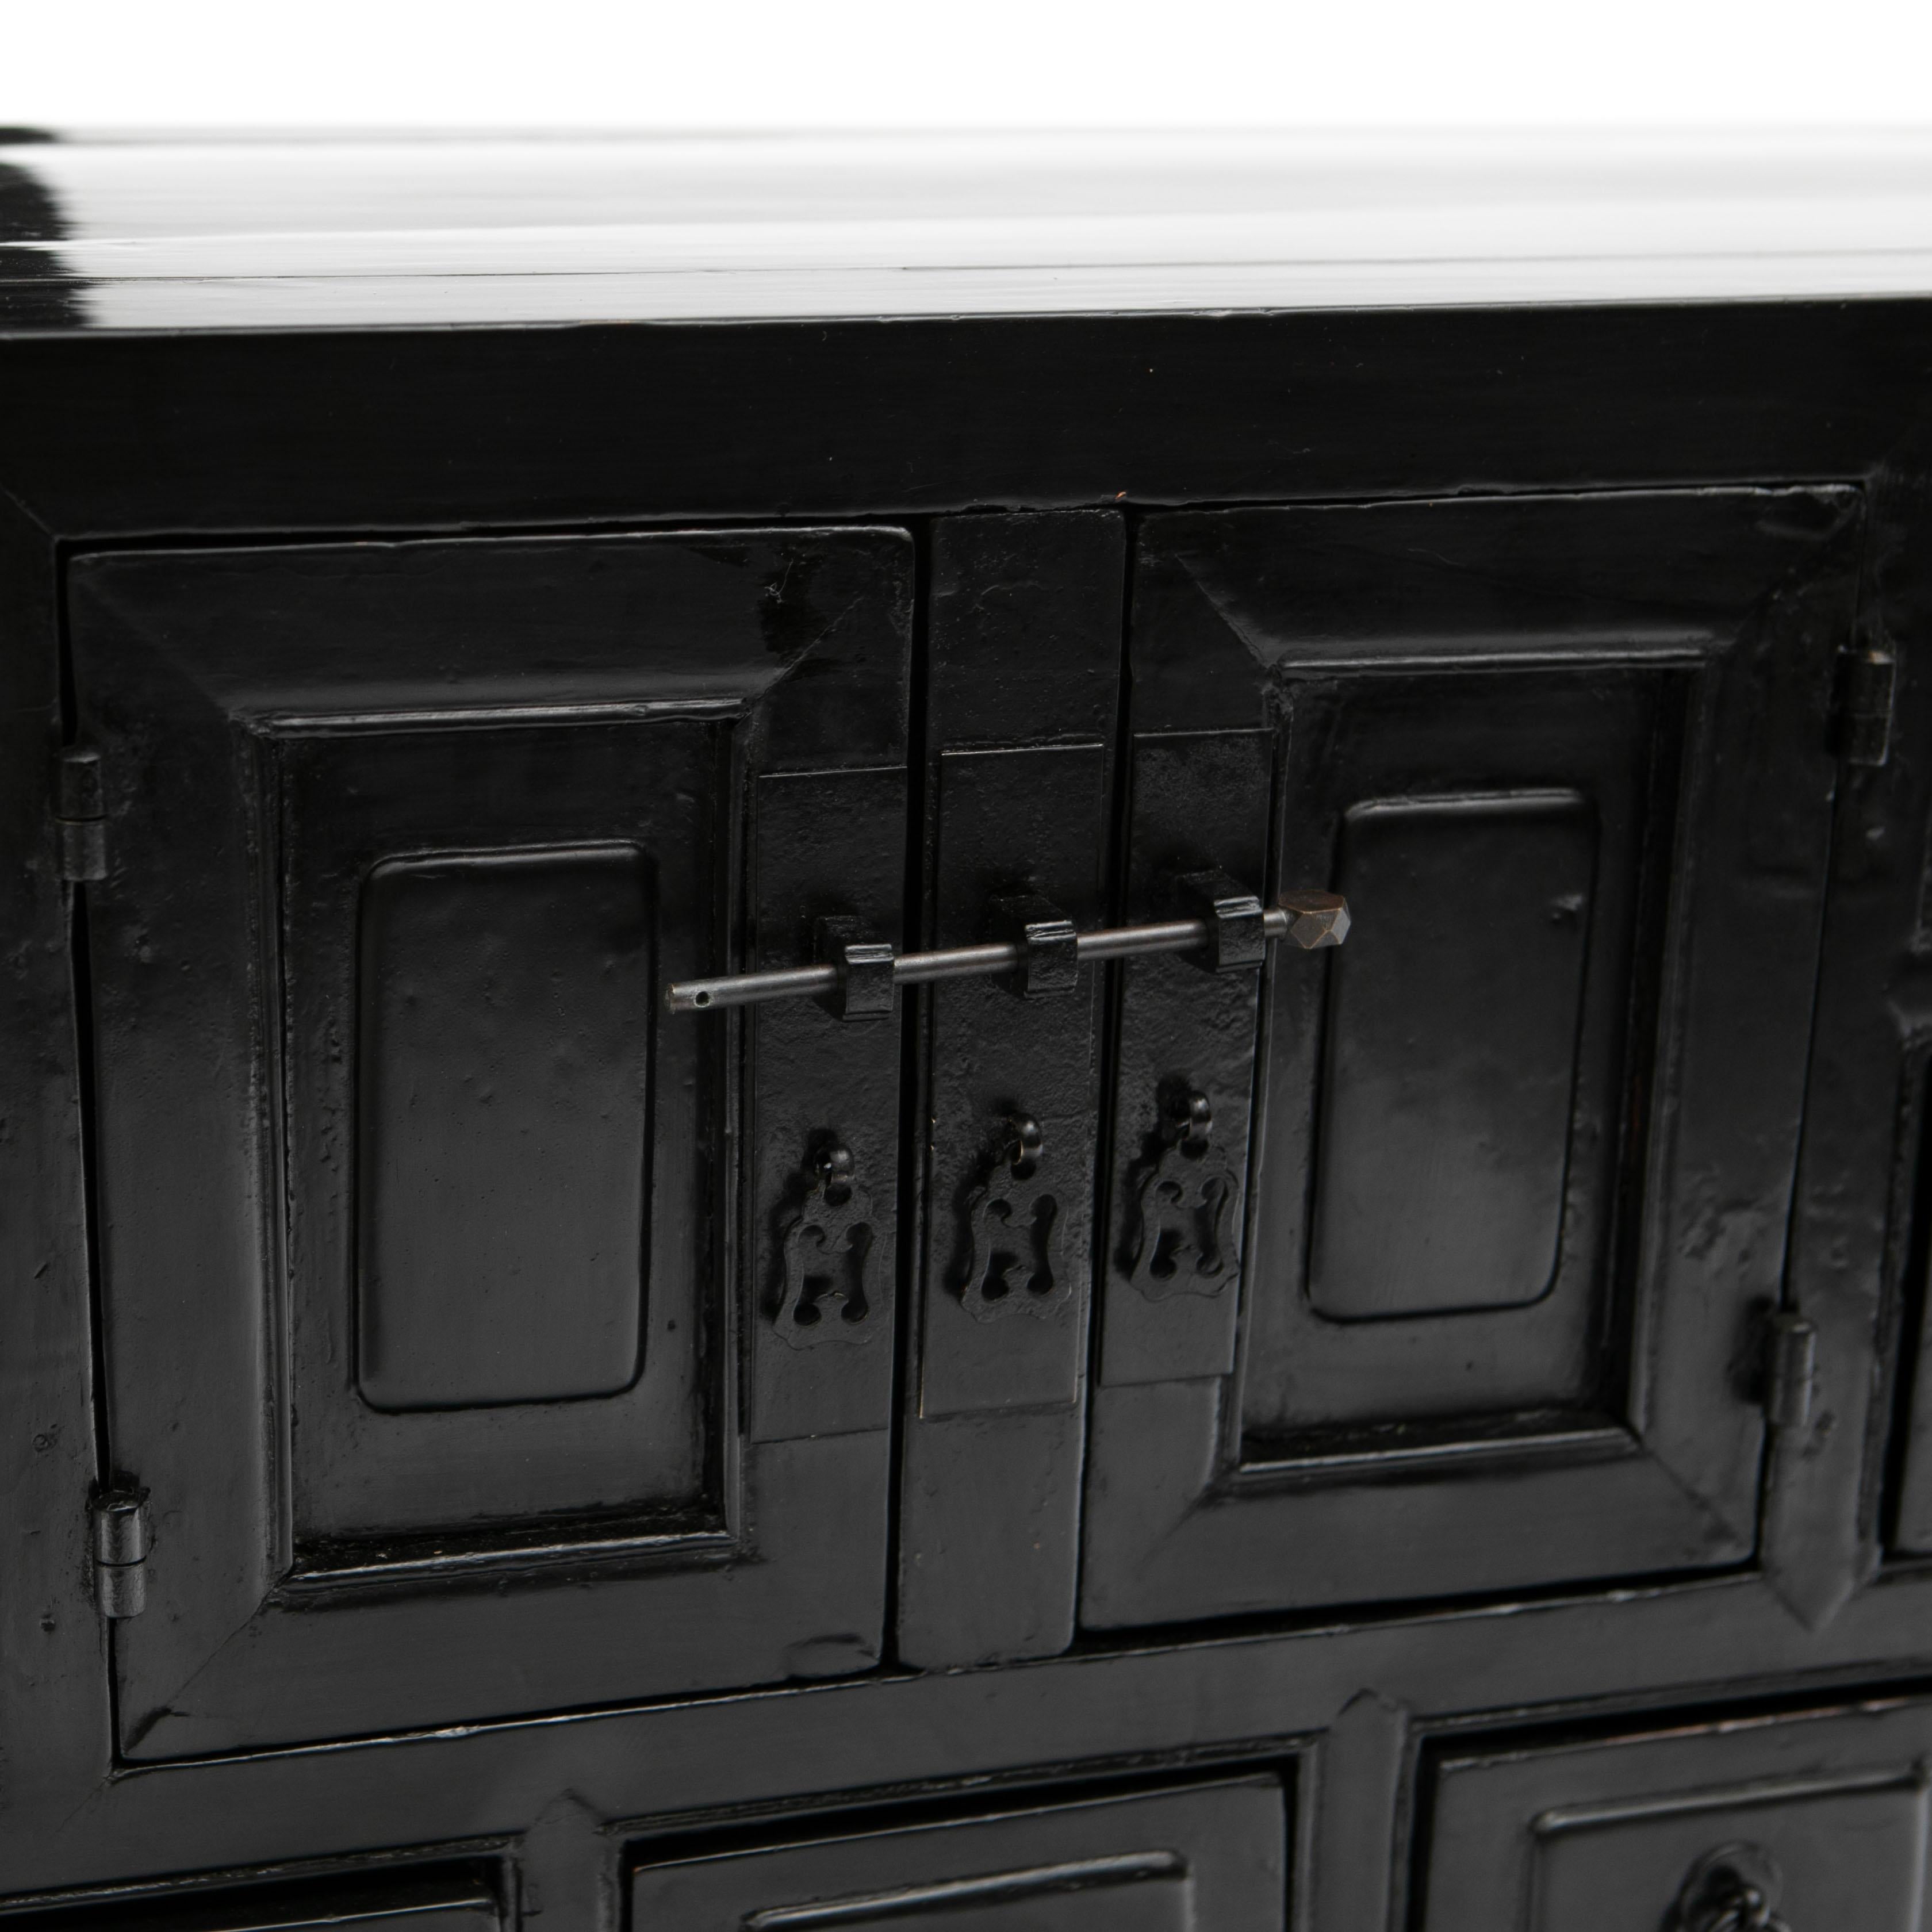 Low Qing Period Sideboard in Black Lacquer In Good Condition For Sale In Kastrup, DK